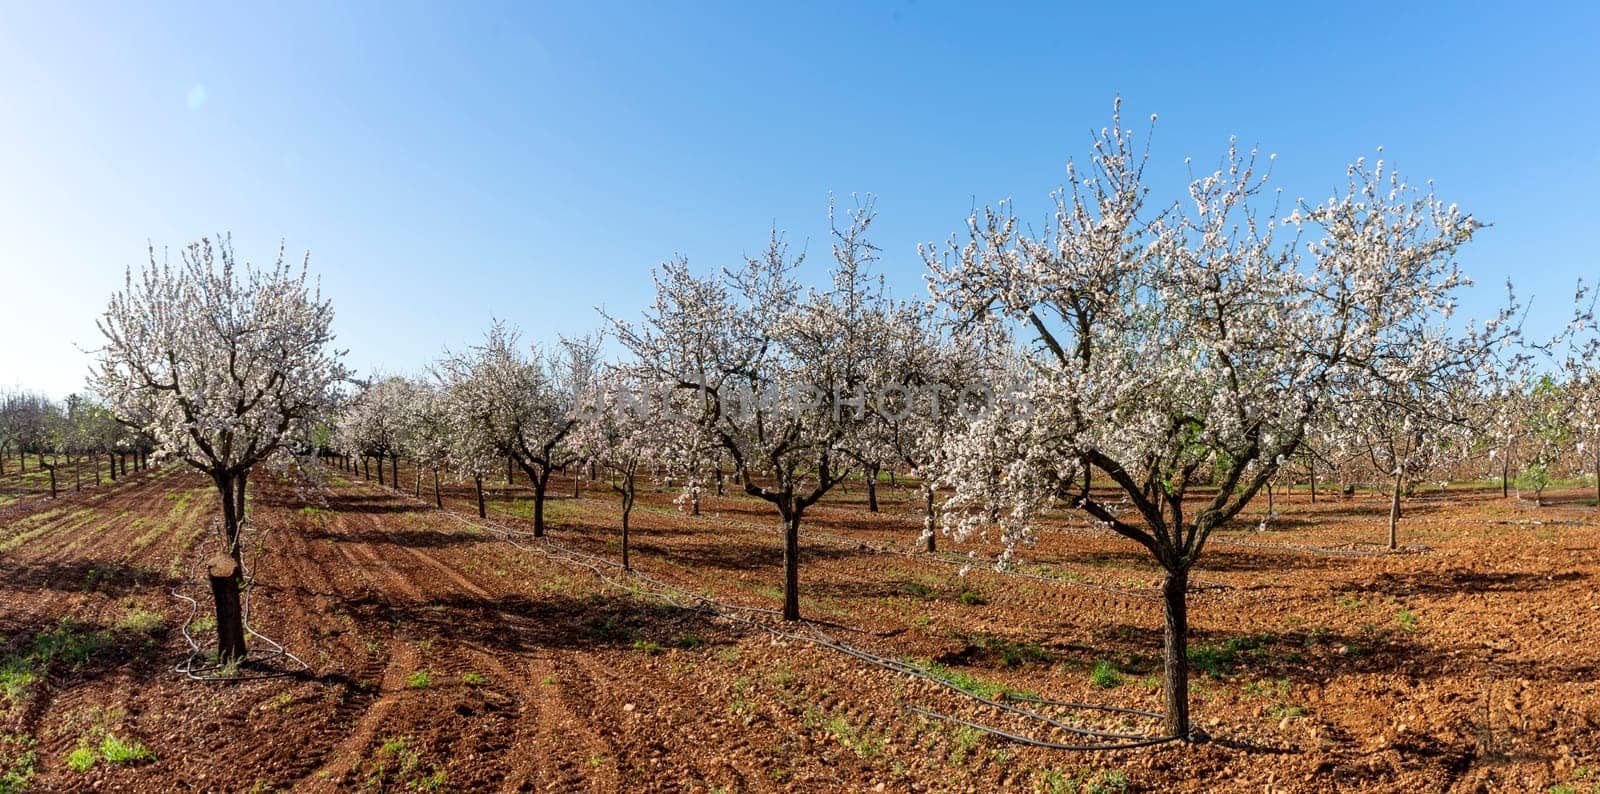 A breathtaking orchard of almond trees in full bloom under the clear blue sky